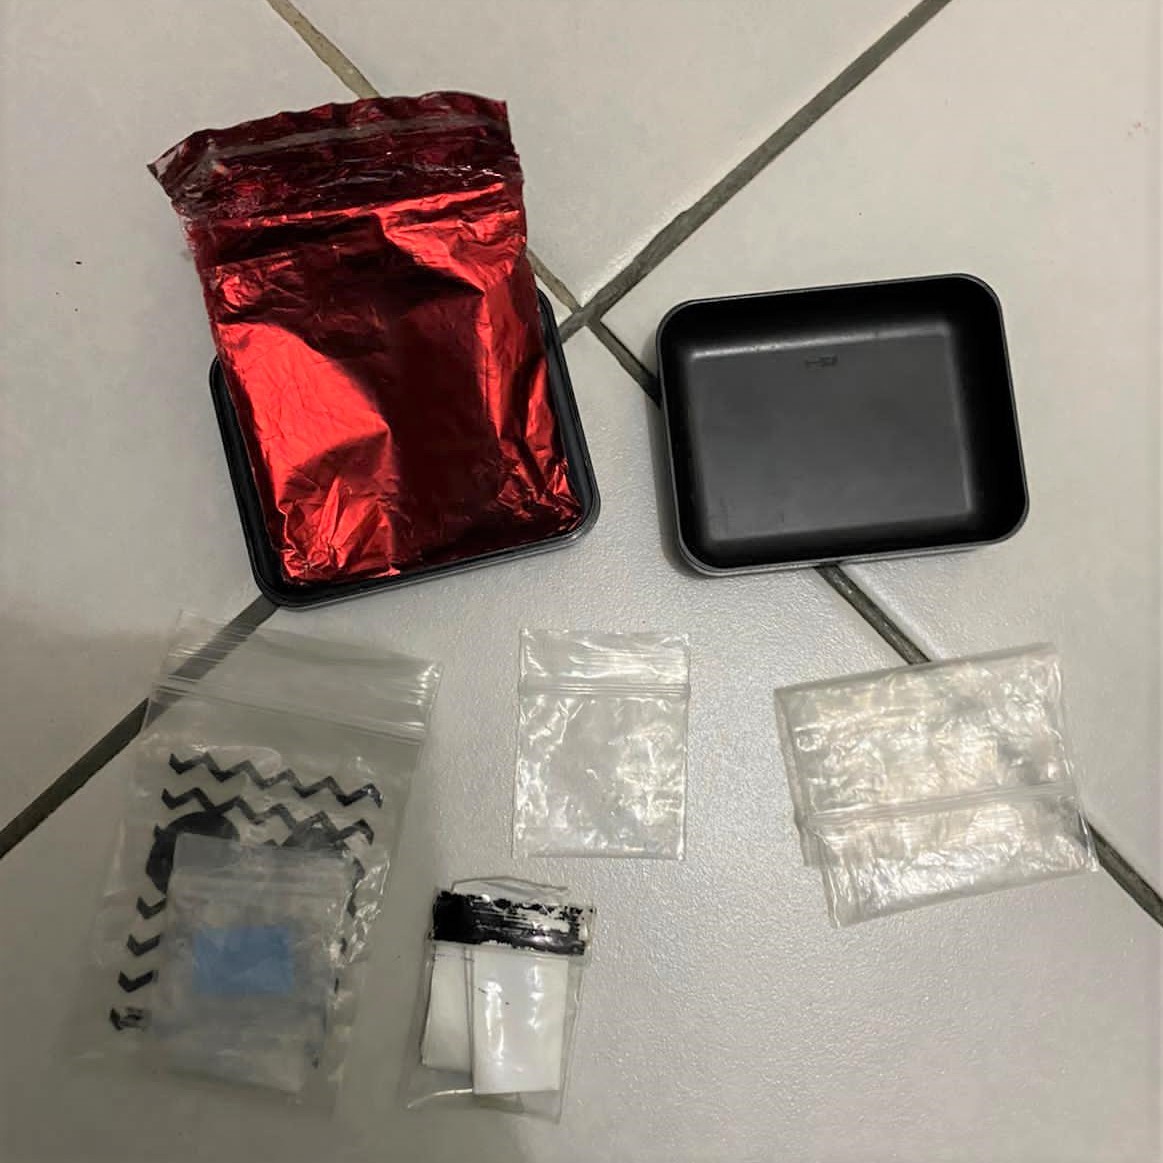 Photo 3: Packets of ‘Ice’ recovered in the vicinity of Lengkok Bahru during a CNB operation on 23 November 2020